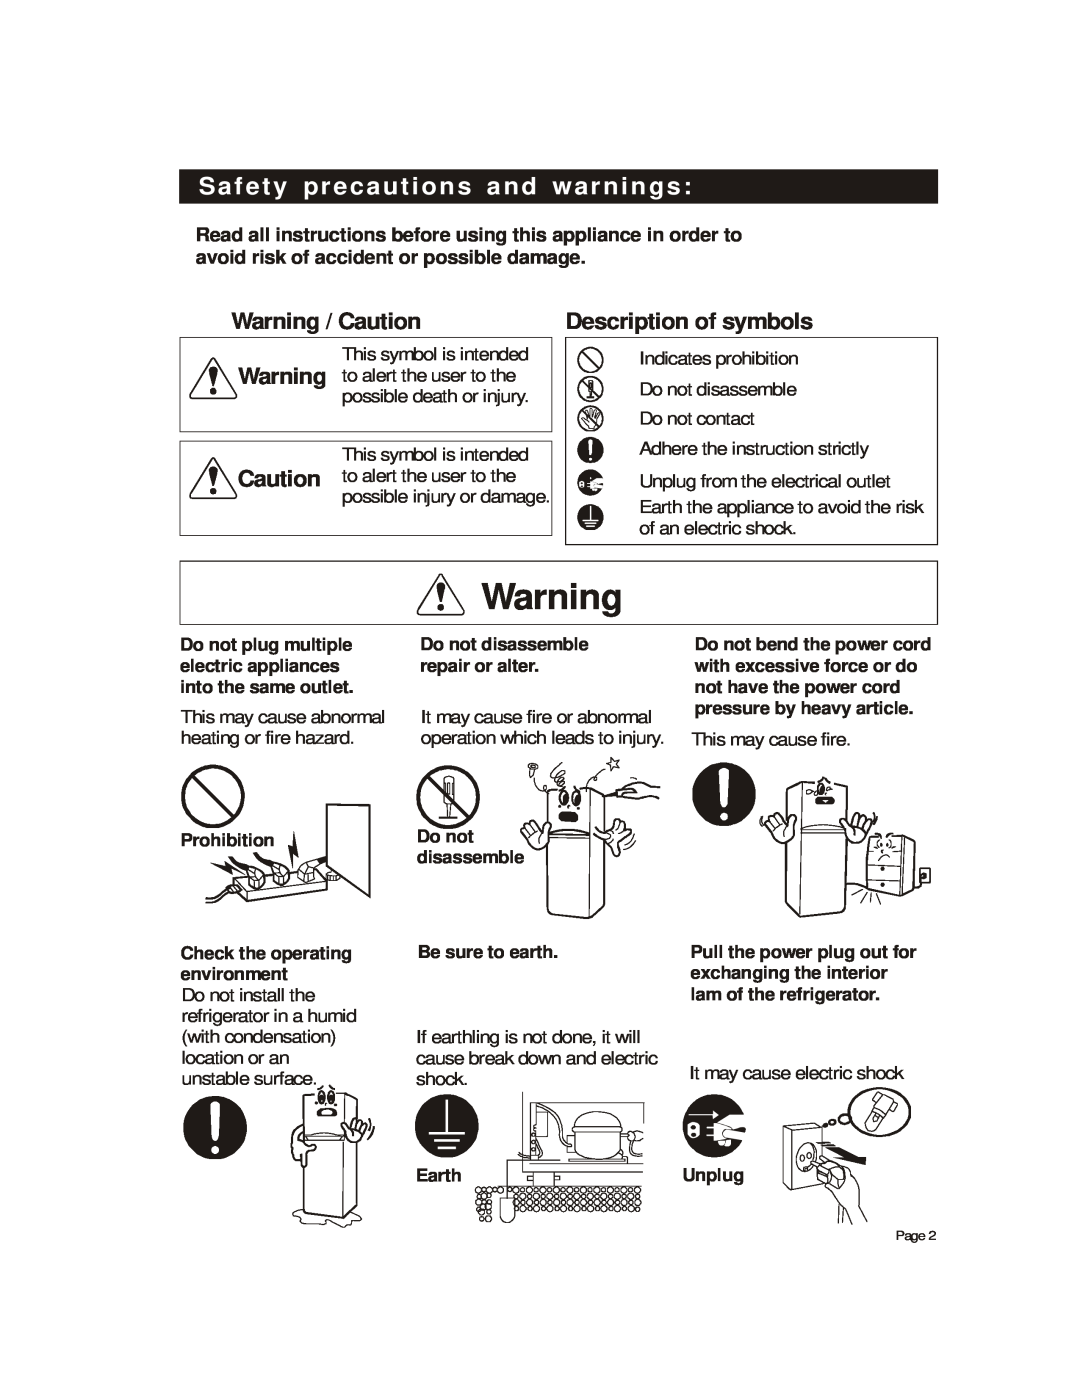 Whirlpool S-04-GNF32E WO, S-04-GNF26E WO Safety precautions and warnings, Warning / Caution, Description of symbols 